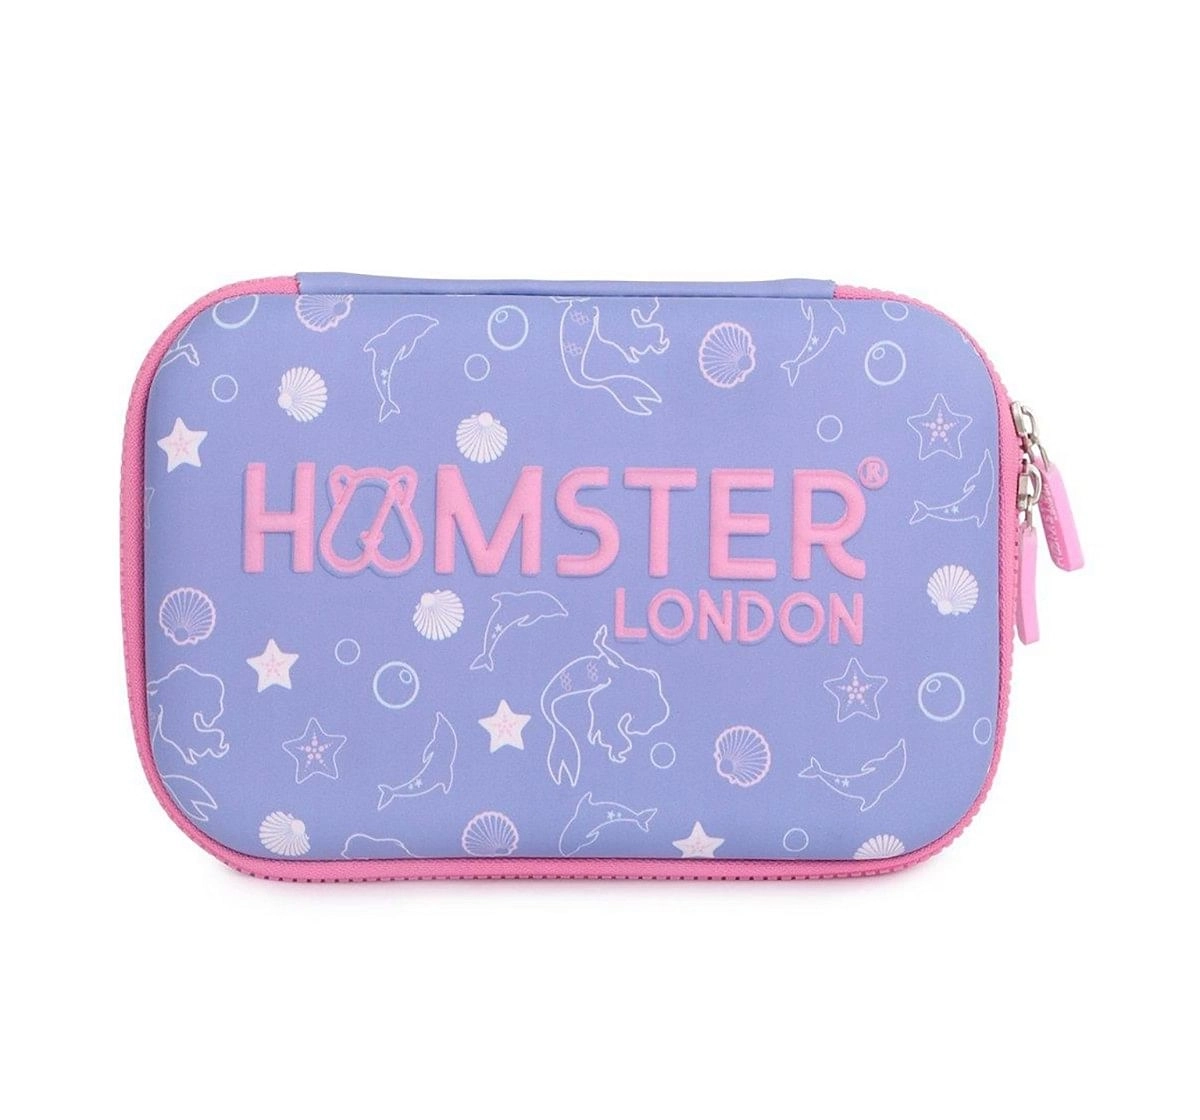 Hamster London Sequence Mermaid Stationery Hardcase for age 3Y+ (Pink)